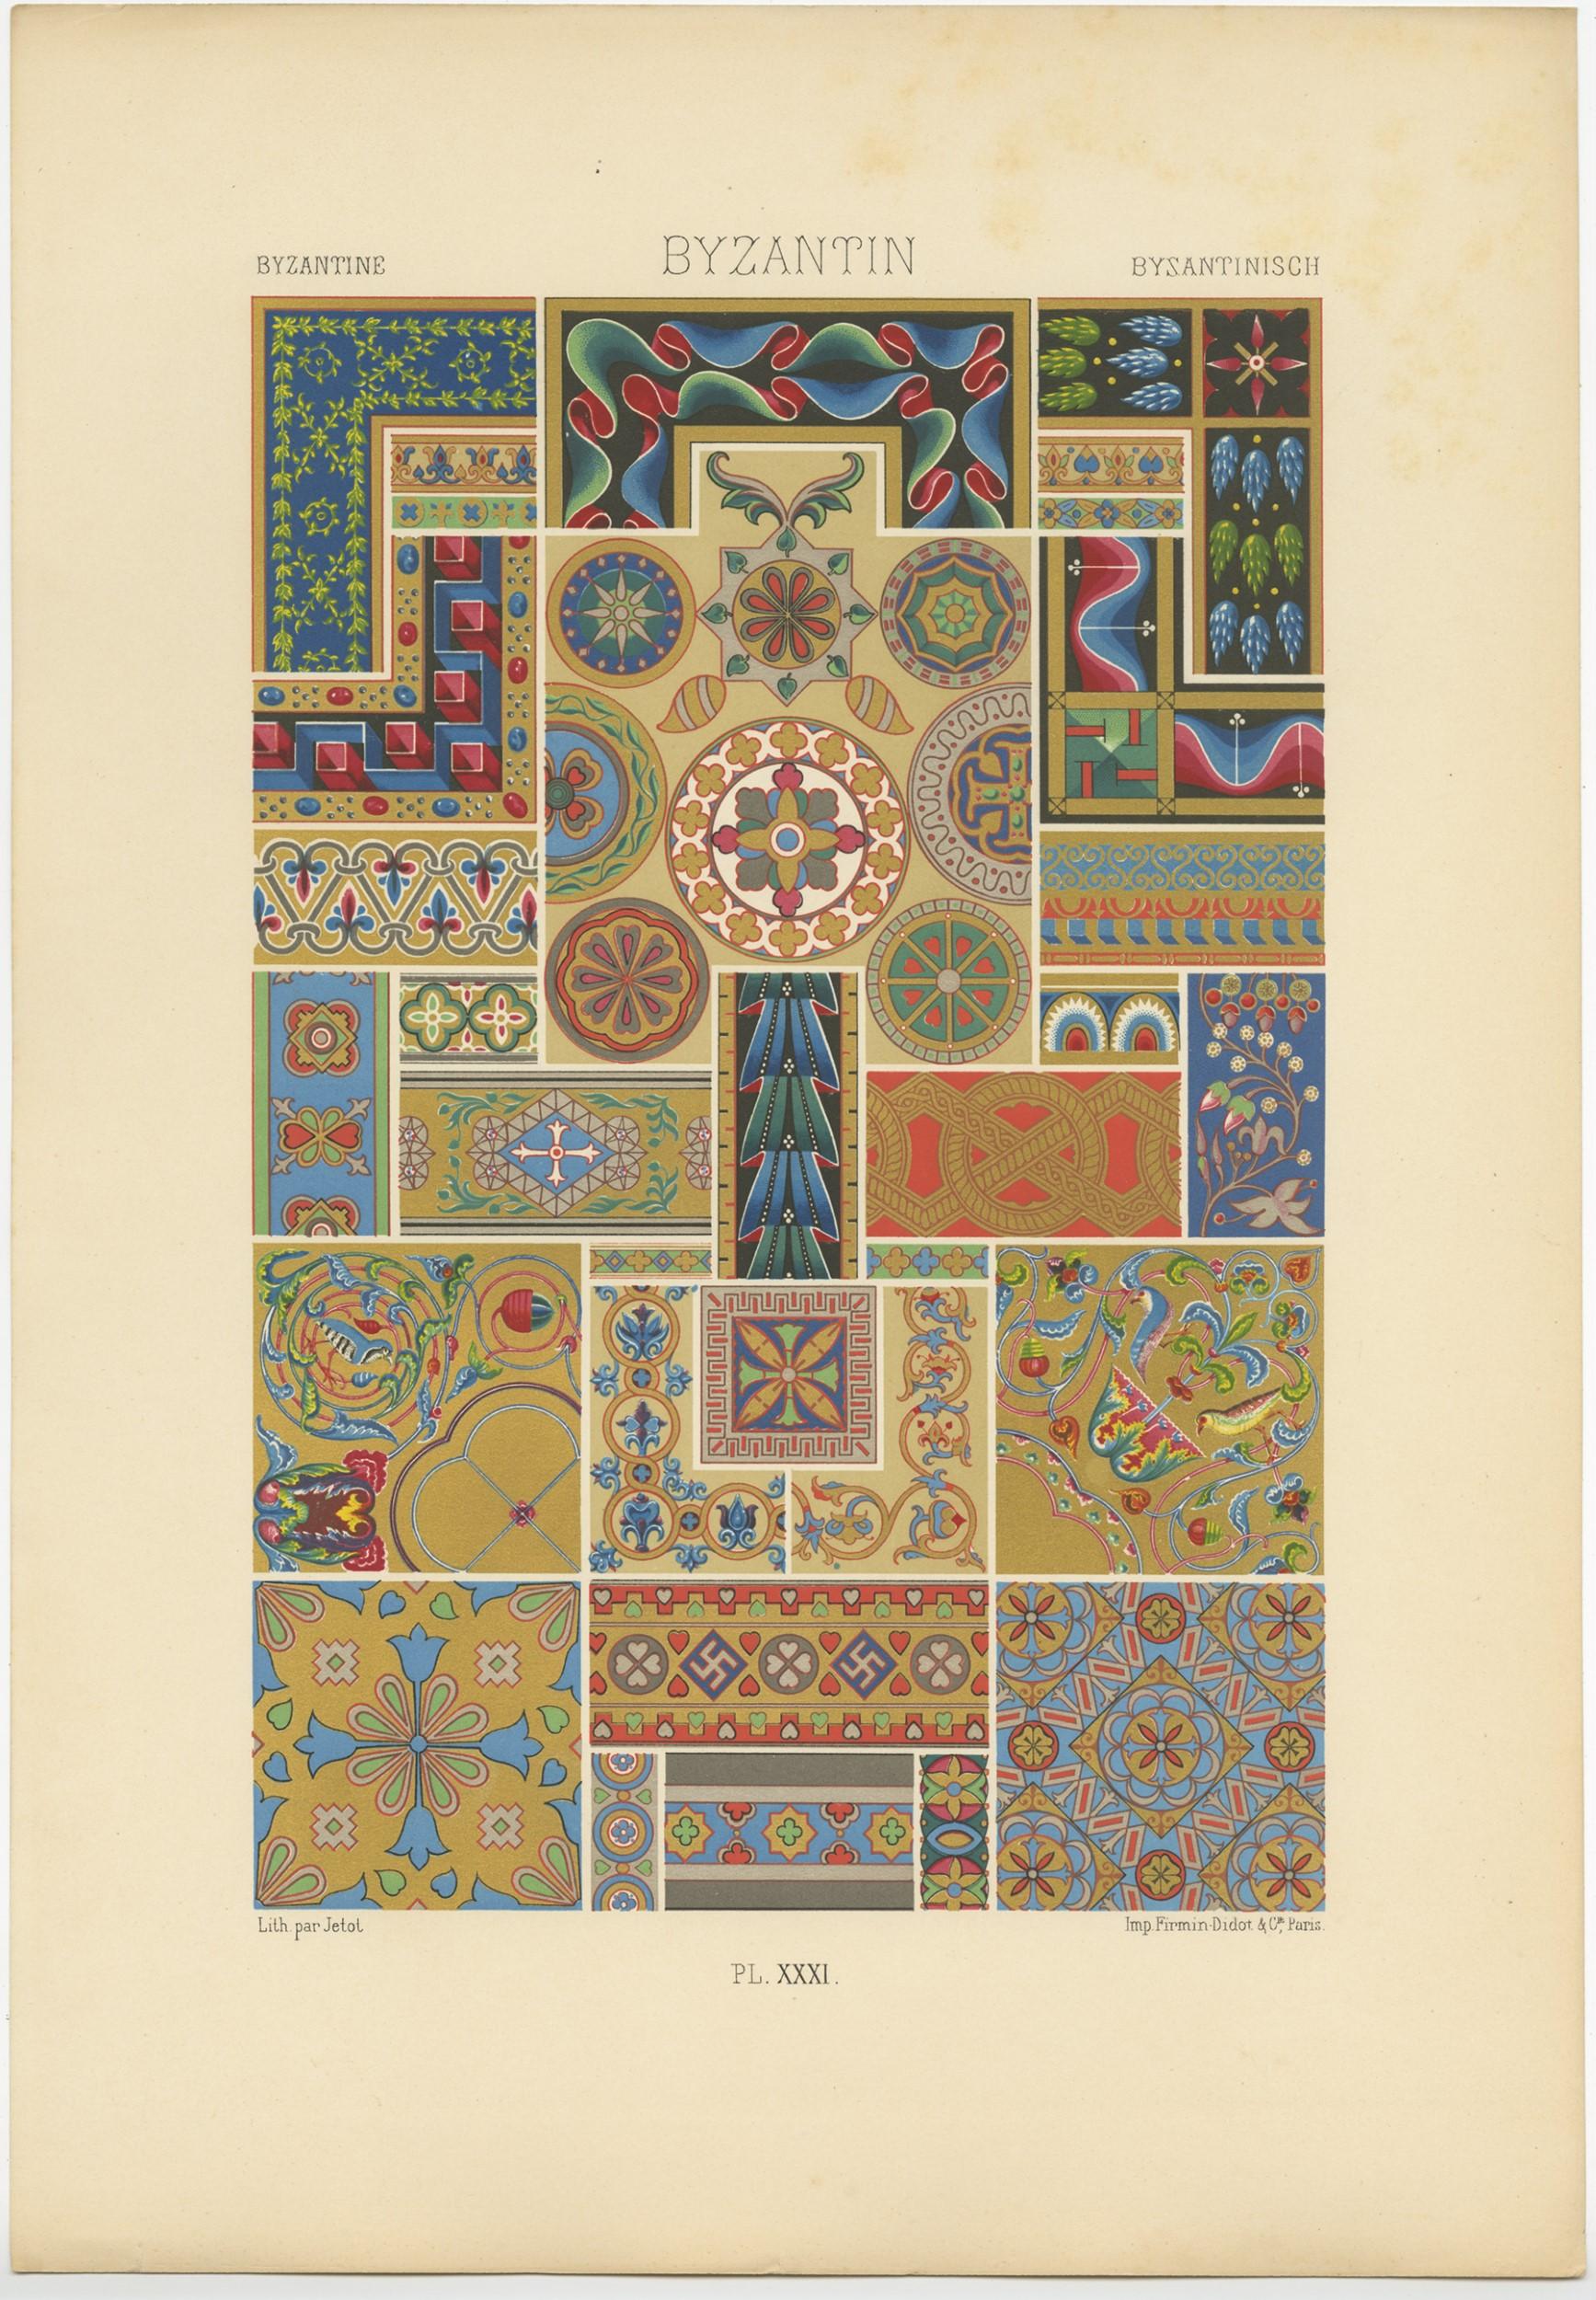 Antique print titled 'Byzantine - Byzantin - Bysantisch'. Chromolithograph of Byzantine ornaments and decorative arts. This print originates from 'l'Ornement Polychrome' by Auguste Racinet. Published circa 1890.